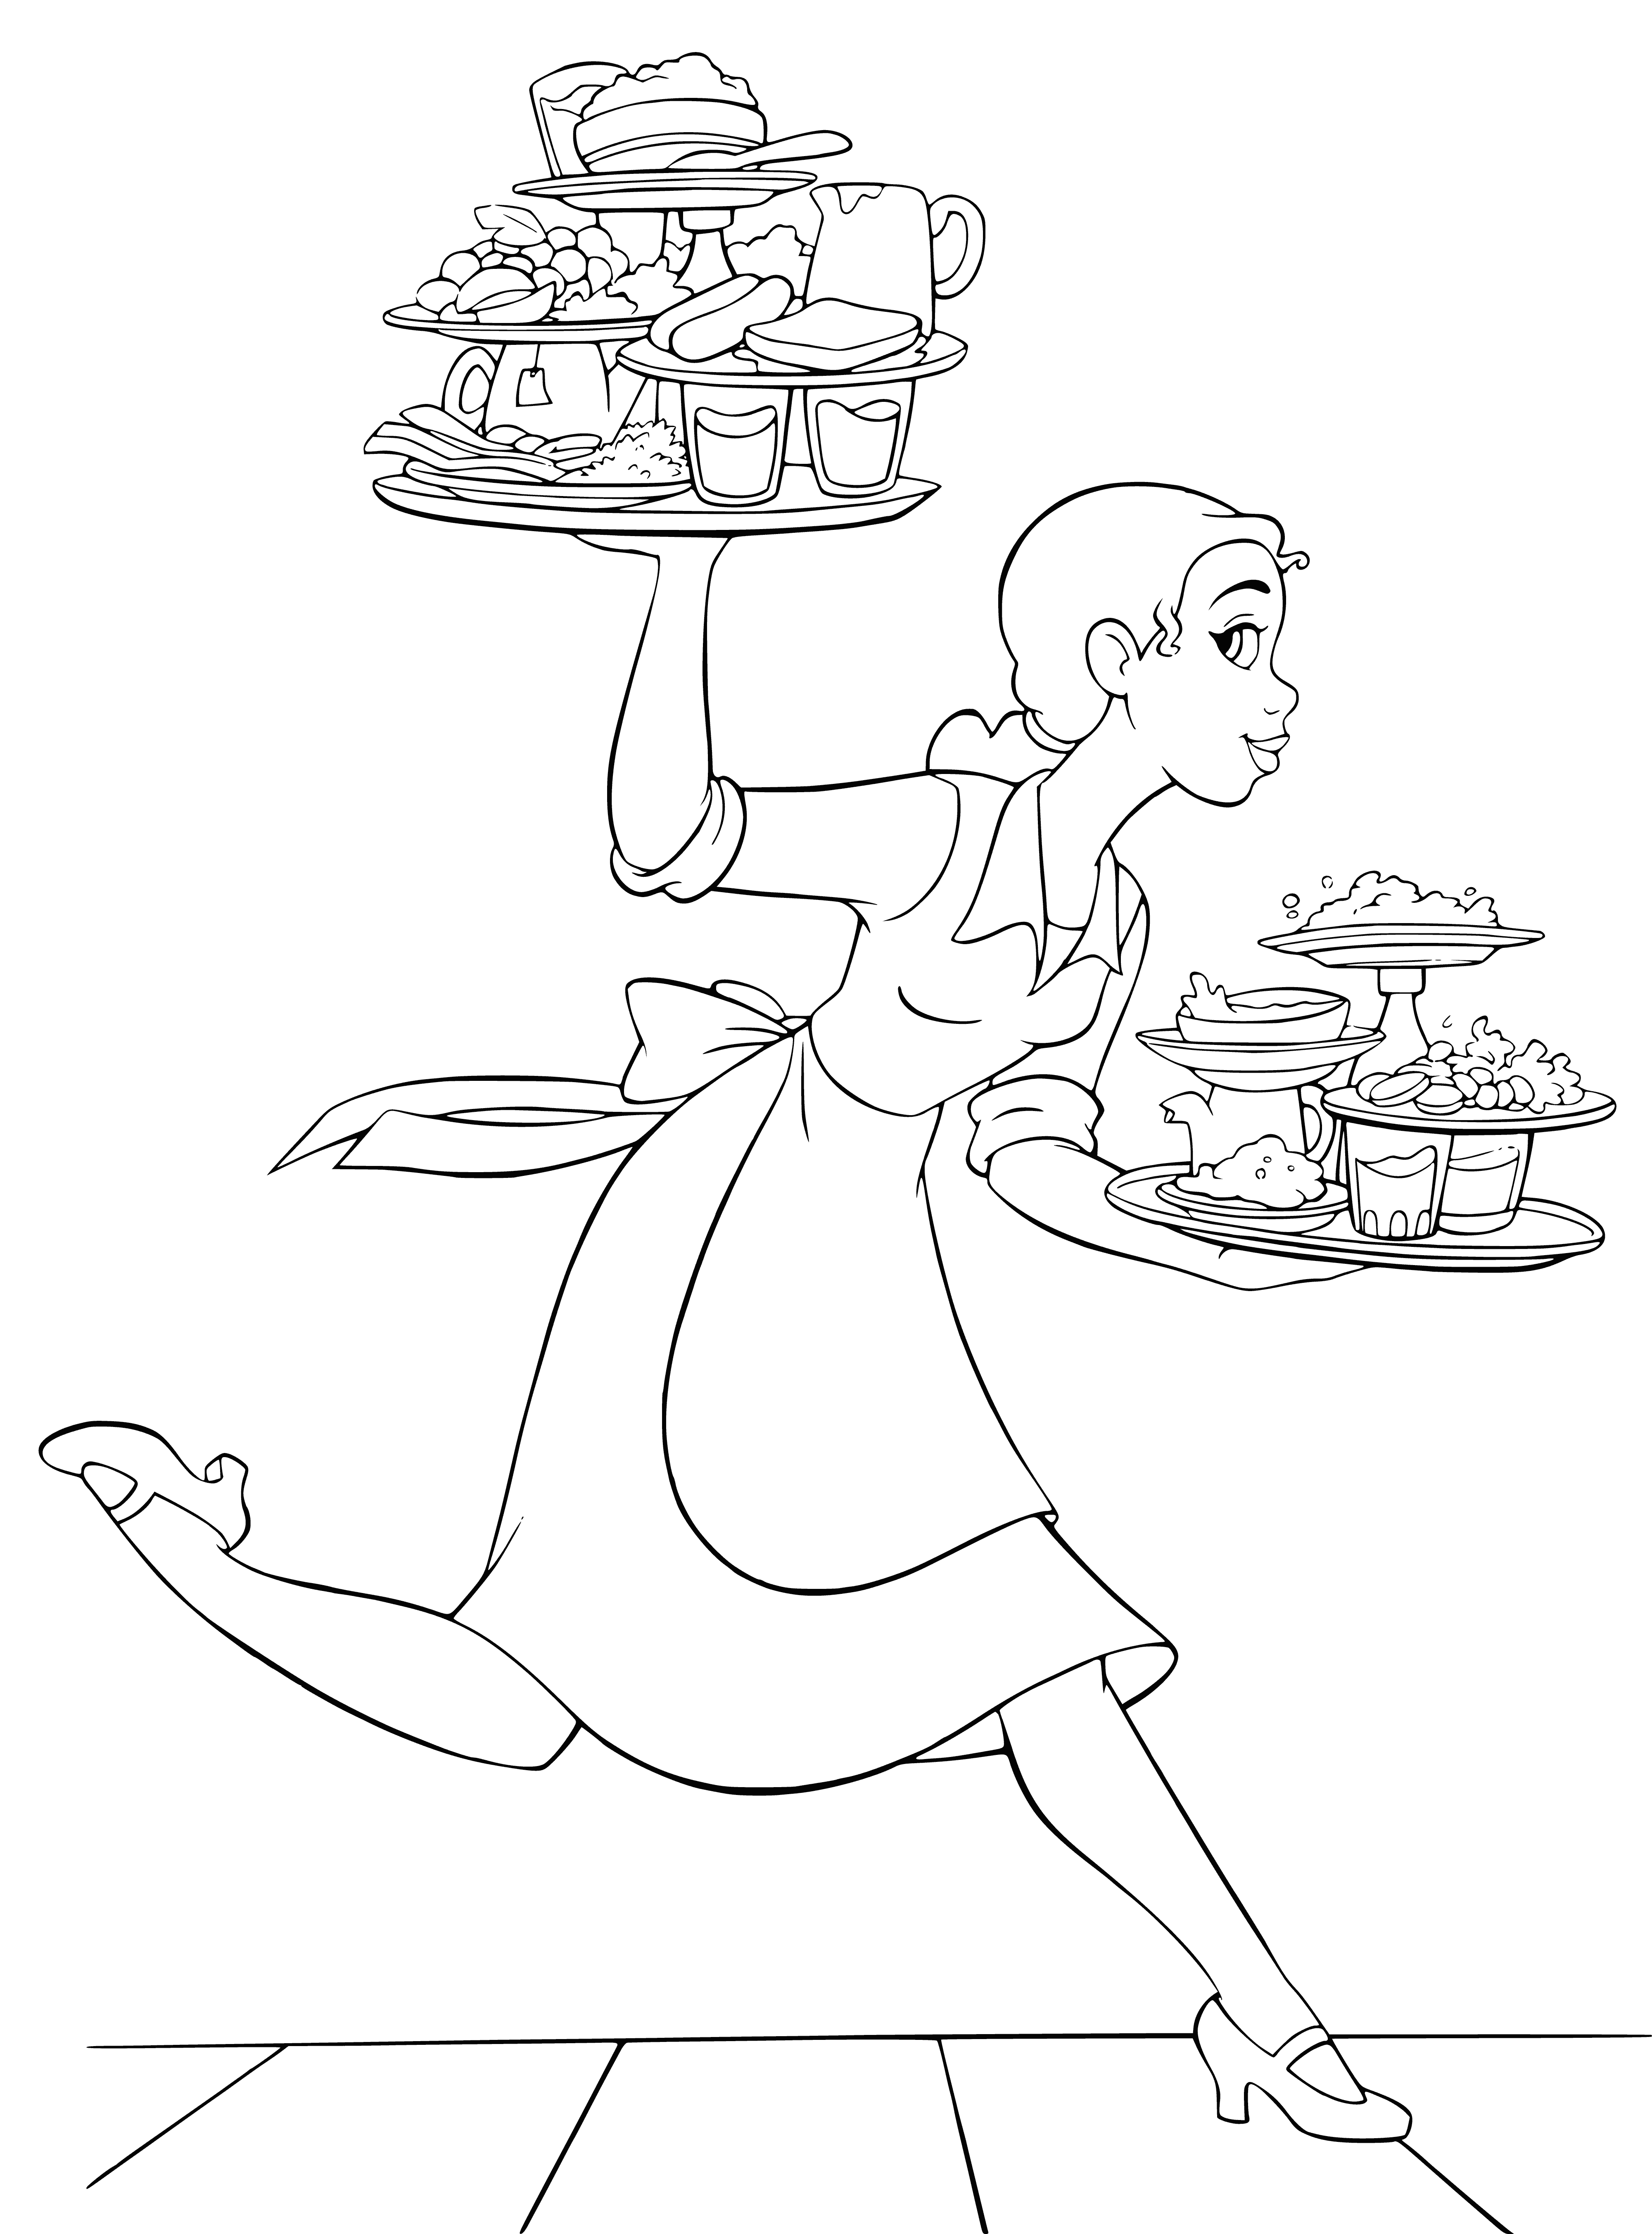 coloring page: Tiana, mid-20s, dark skin, ponytail, smile, white collared shirt, black apron, tray of food.